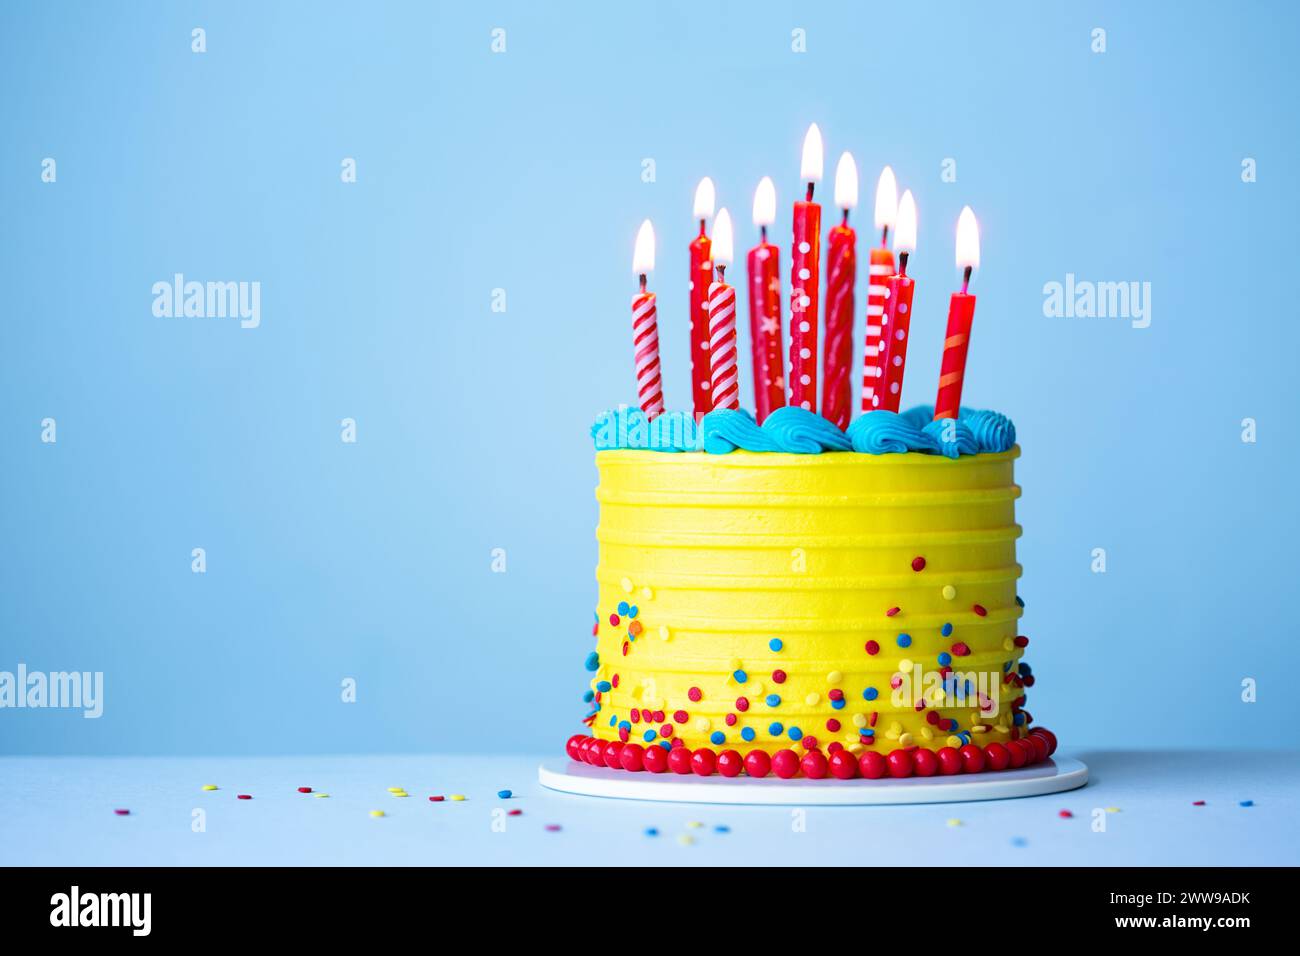 Colorful celebration birthday cake with yellow frosting and red birthday candles against a blue background Stock Photo